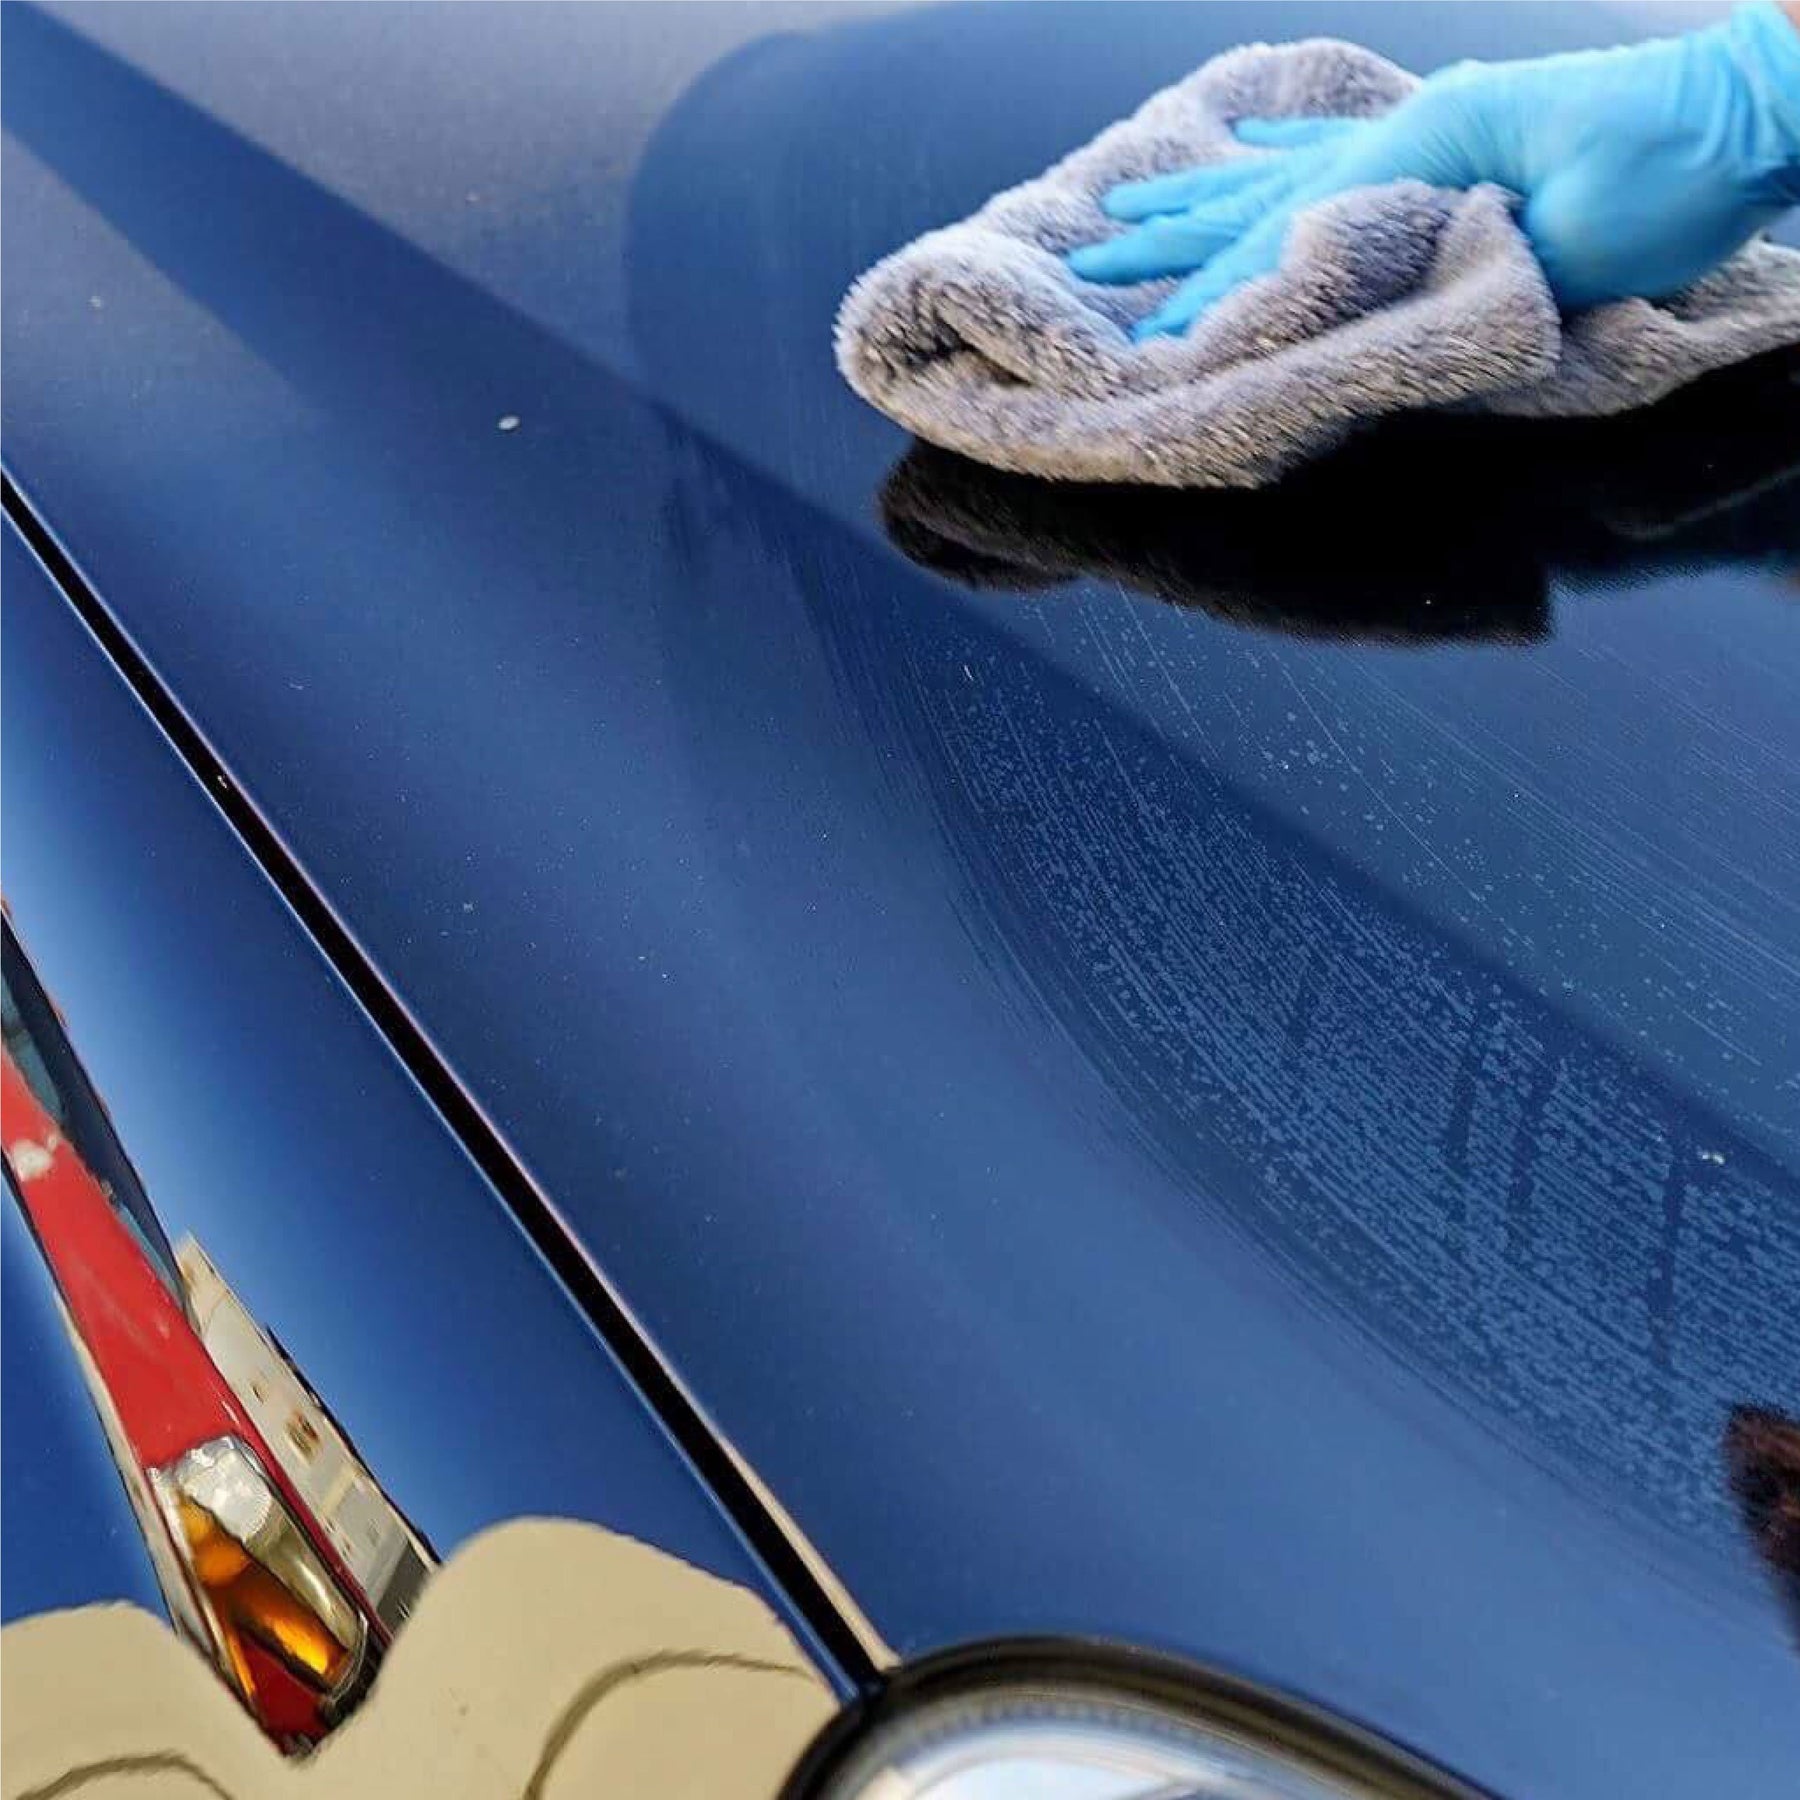 Tips on Graphene Coating Care and Maintenance